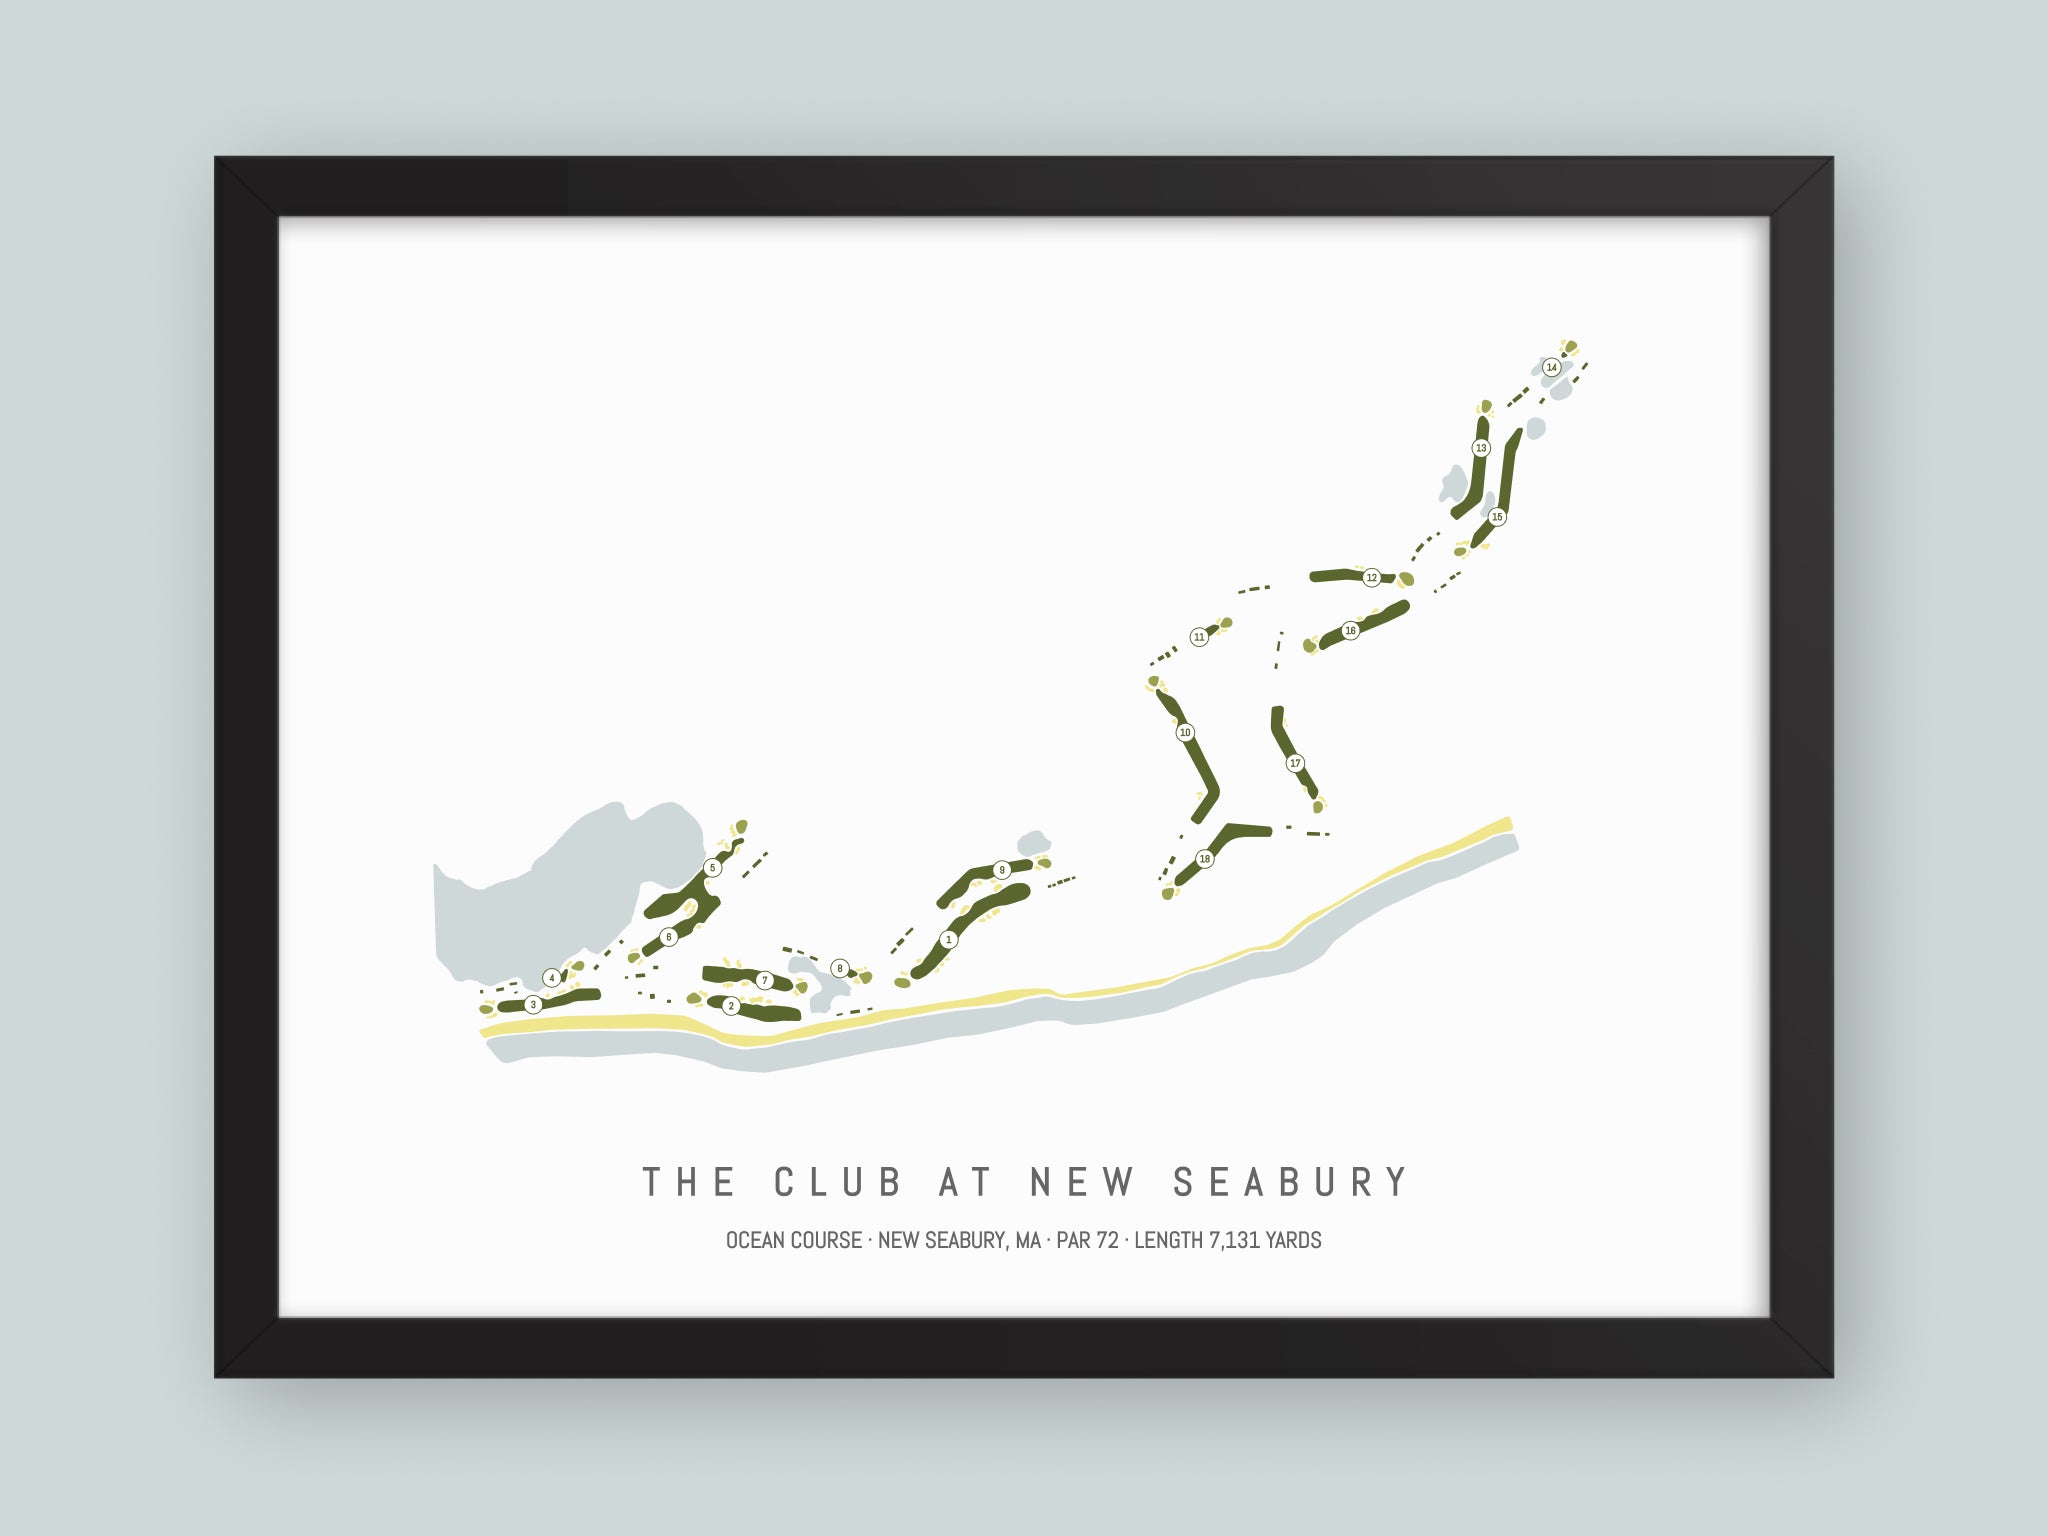 The-Club-at-New-Seabury-Ocean-Course-MA--Black-Frame-24x18-With-Hole-Numbers